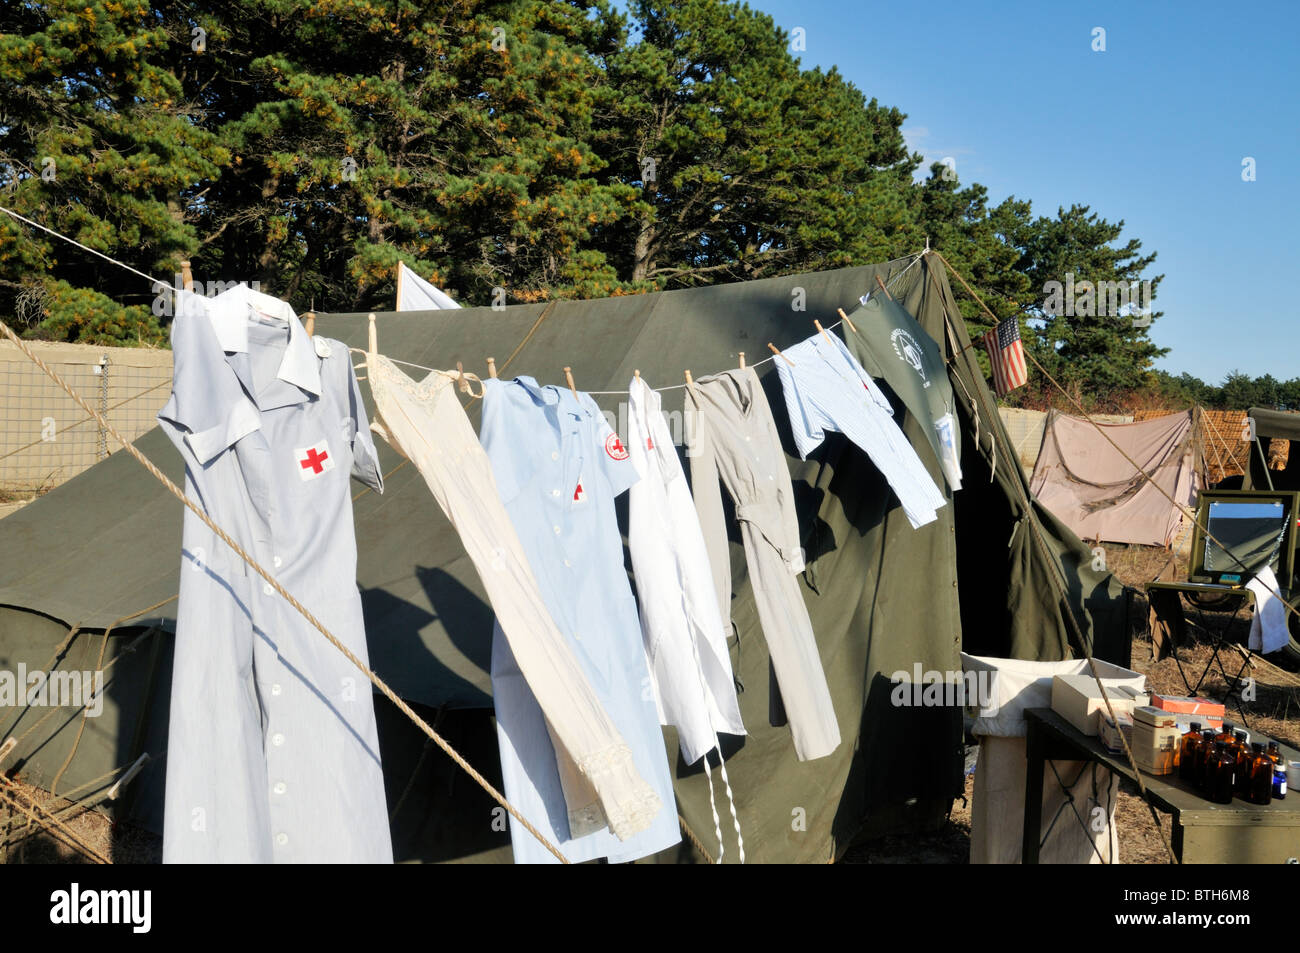 Laundry of nurses hanging outside of World War II First Aid Tent at a reenactment of WWII US military Camp at MMR Cape Cod. Stock Photo